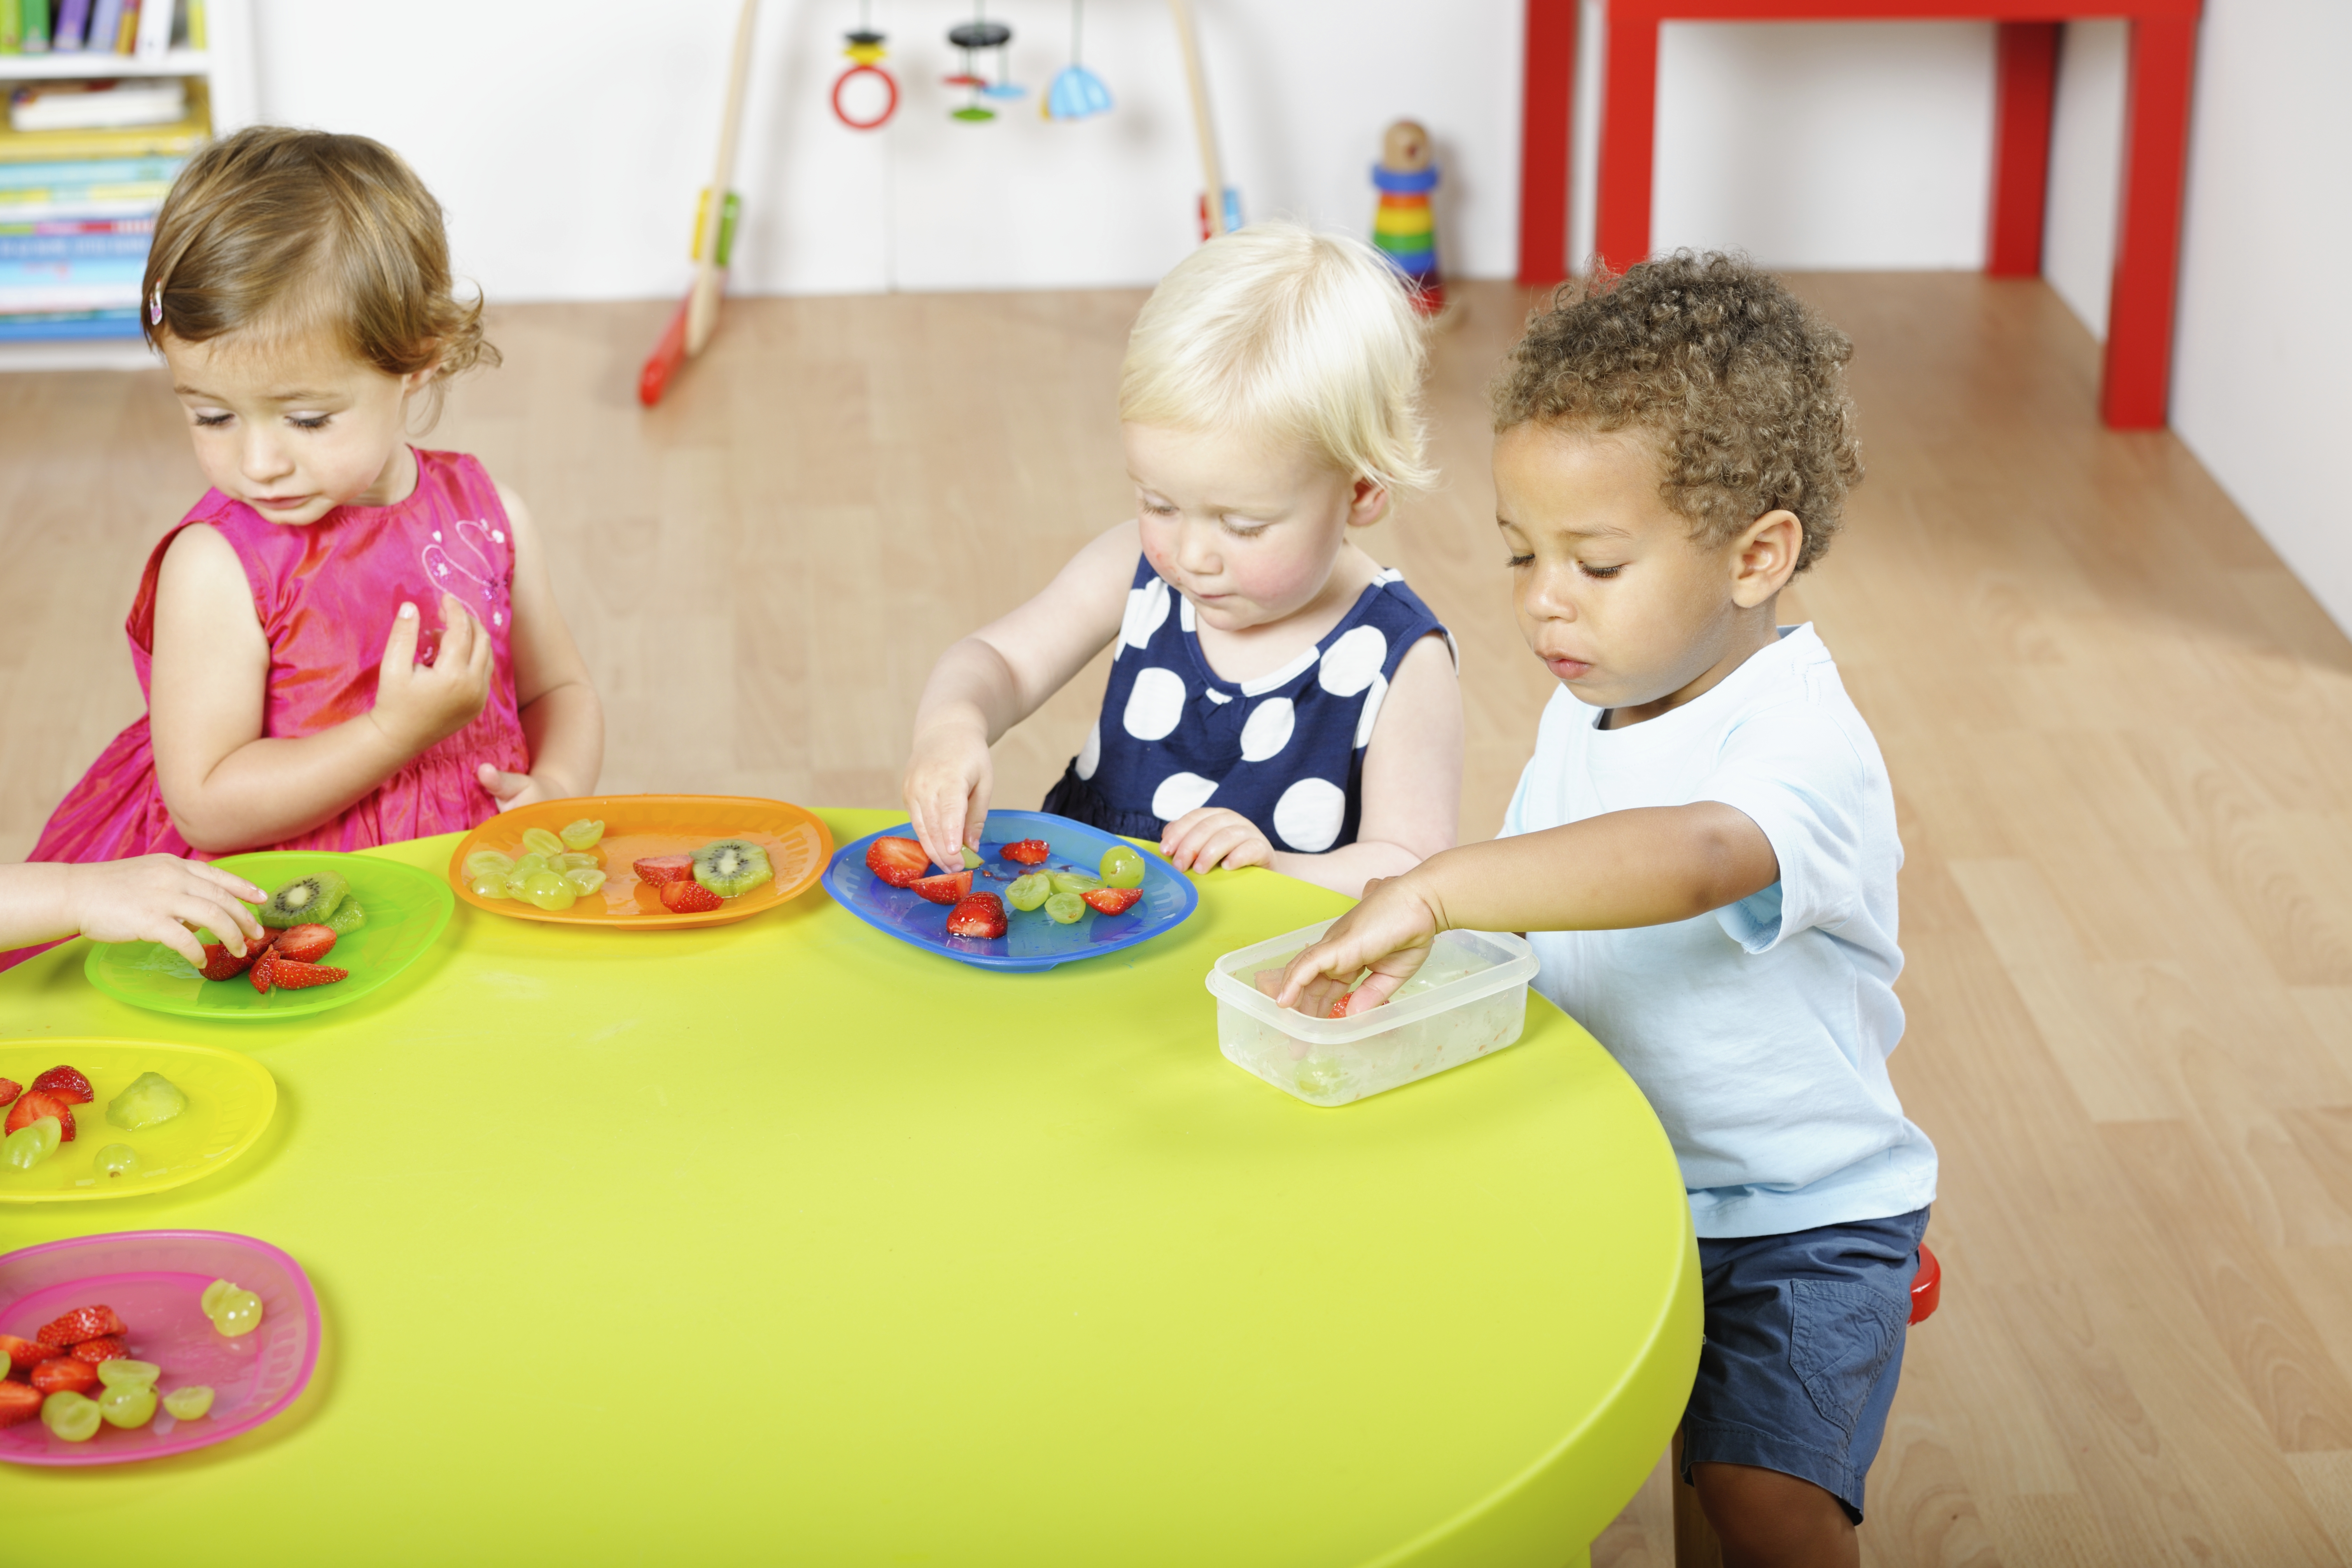 Young children eating healthy snacks in a day care setting. (iStock Photo)